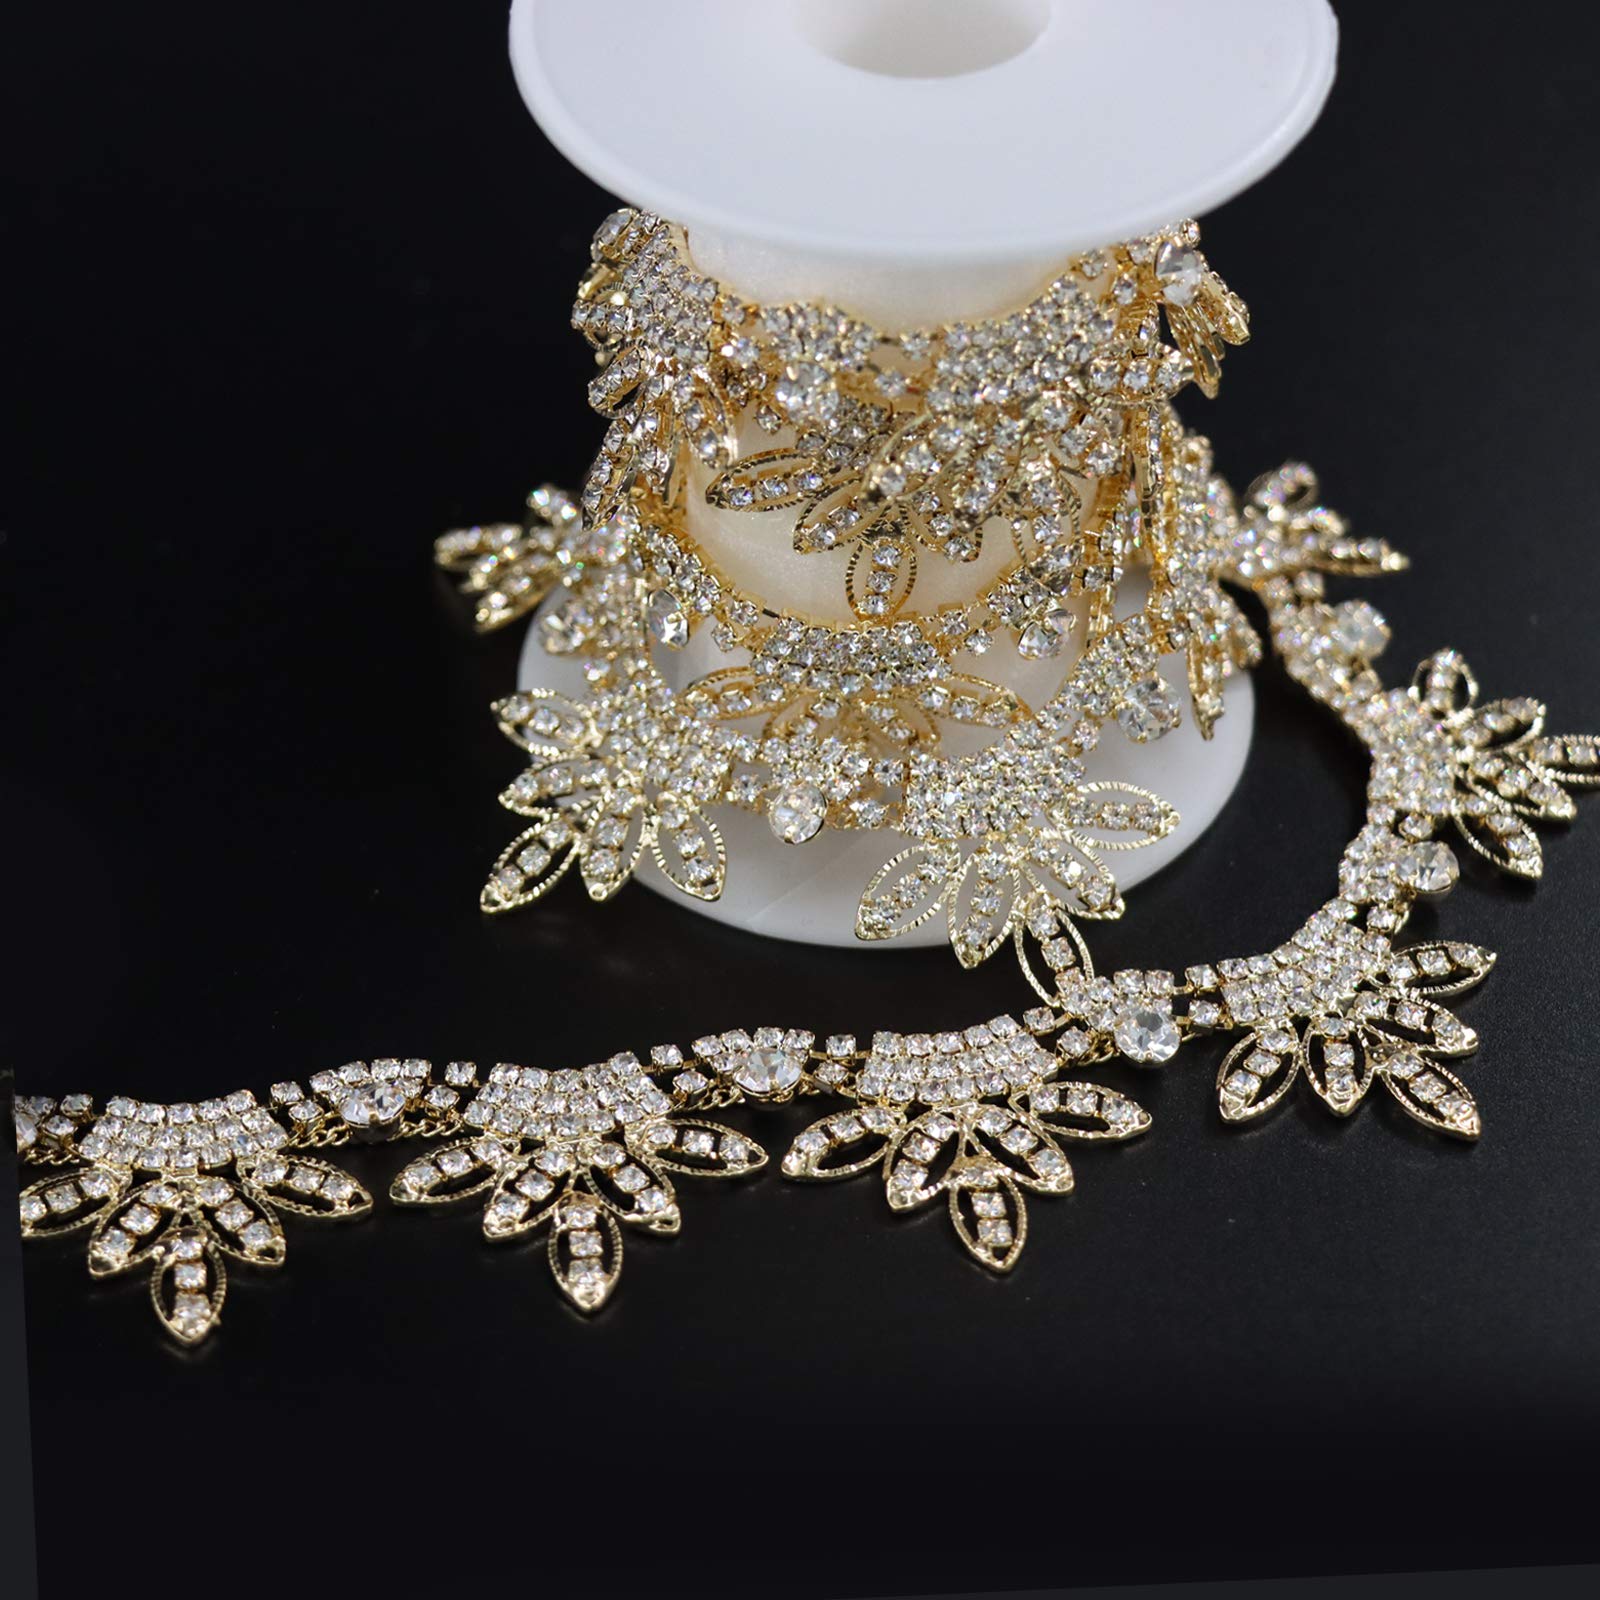 Perial Co Gold Rhinestone Fringe Trim Sold by the Yard 18 inches